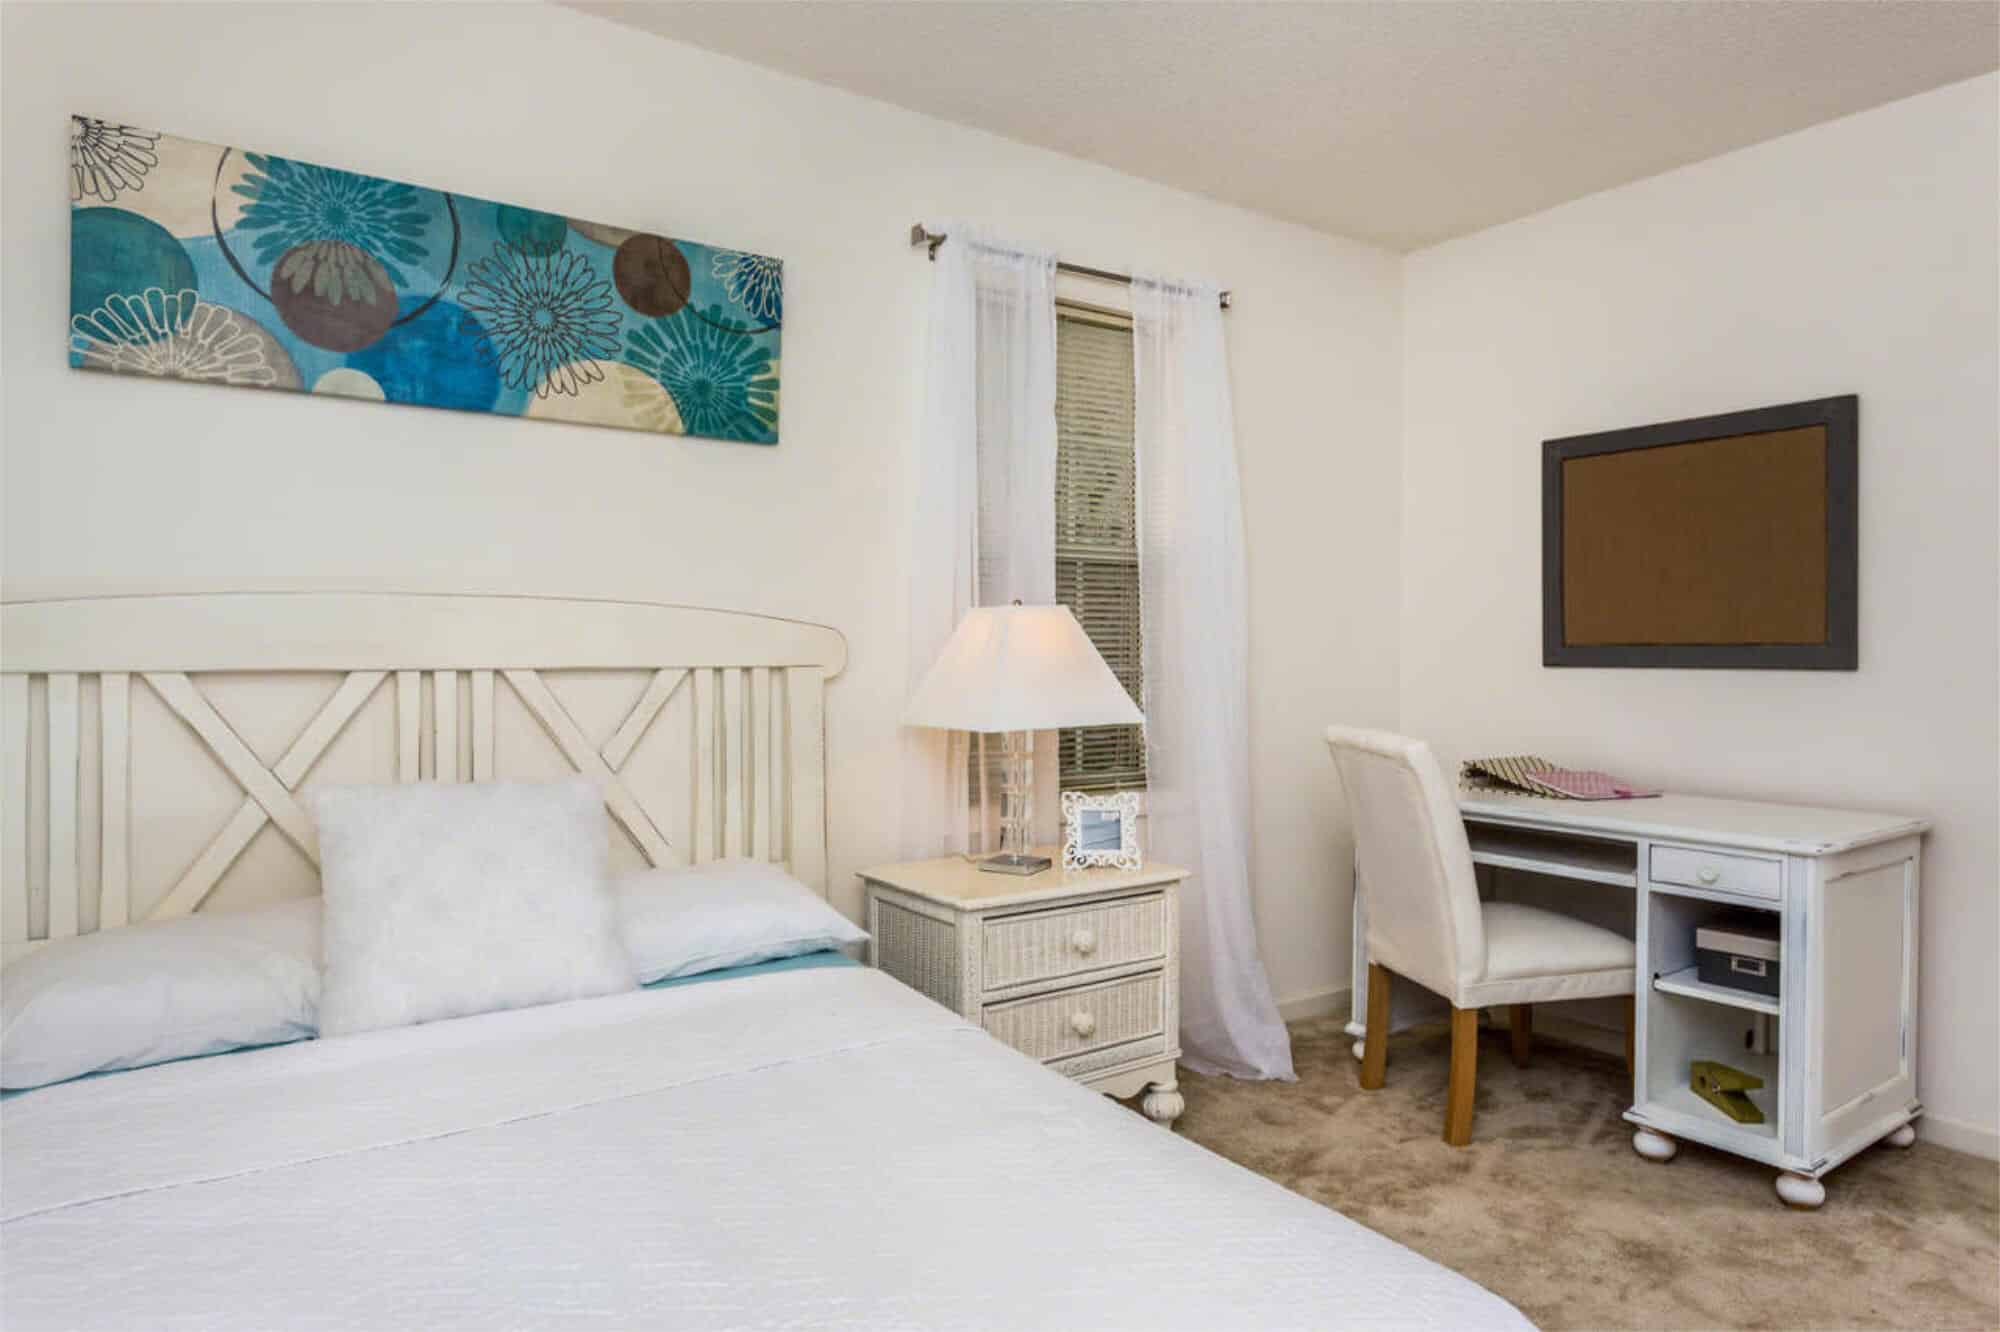 raleigh off campus apartments near nc state university private bedroom